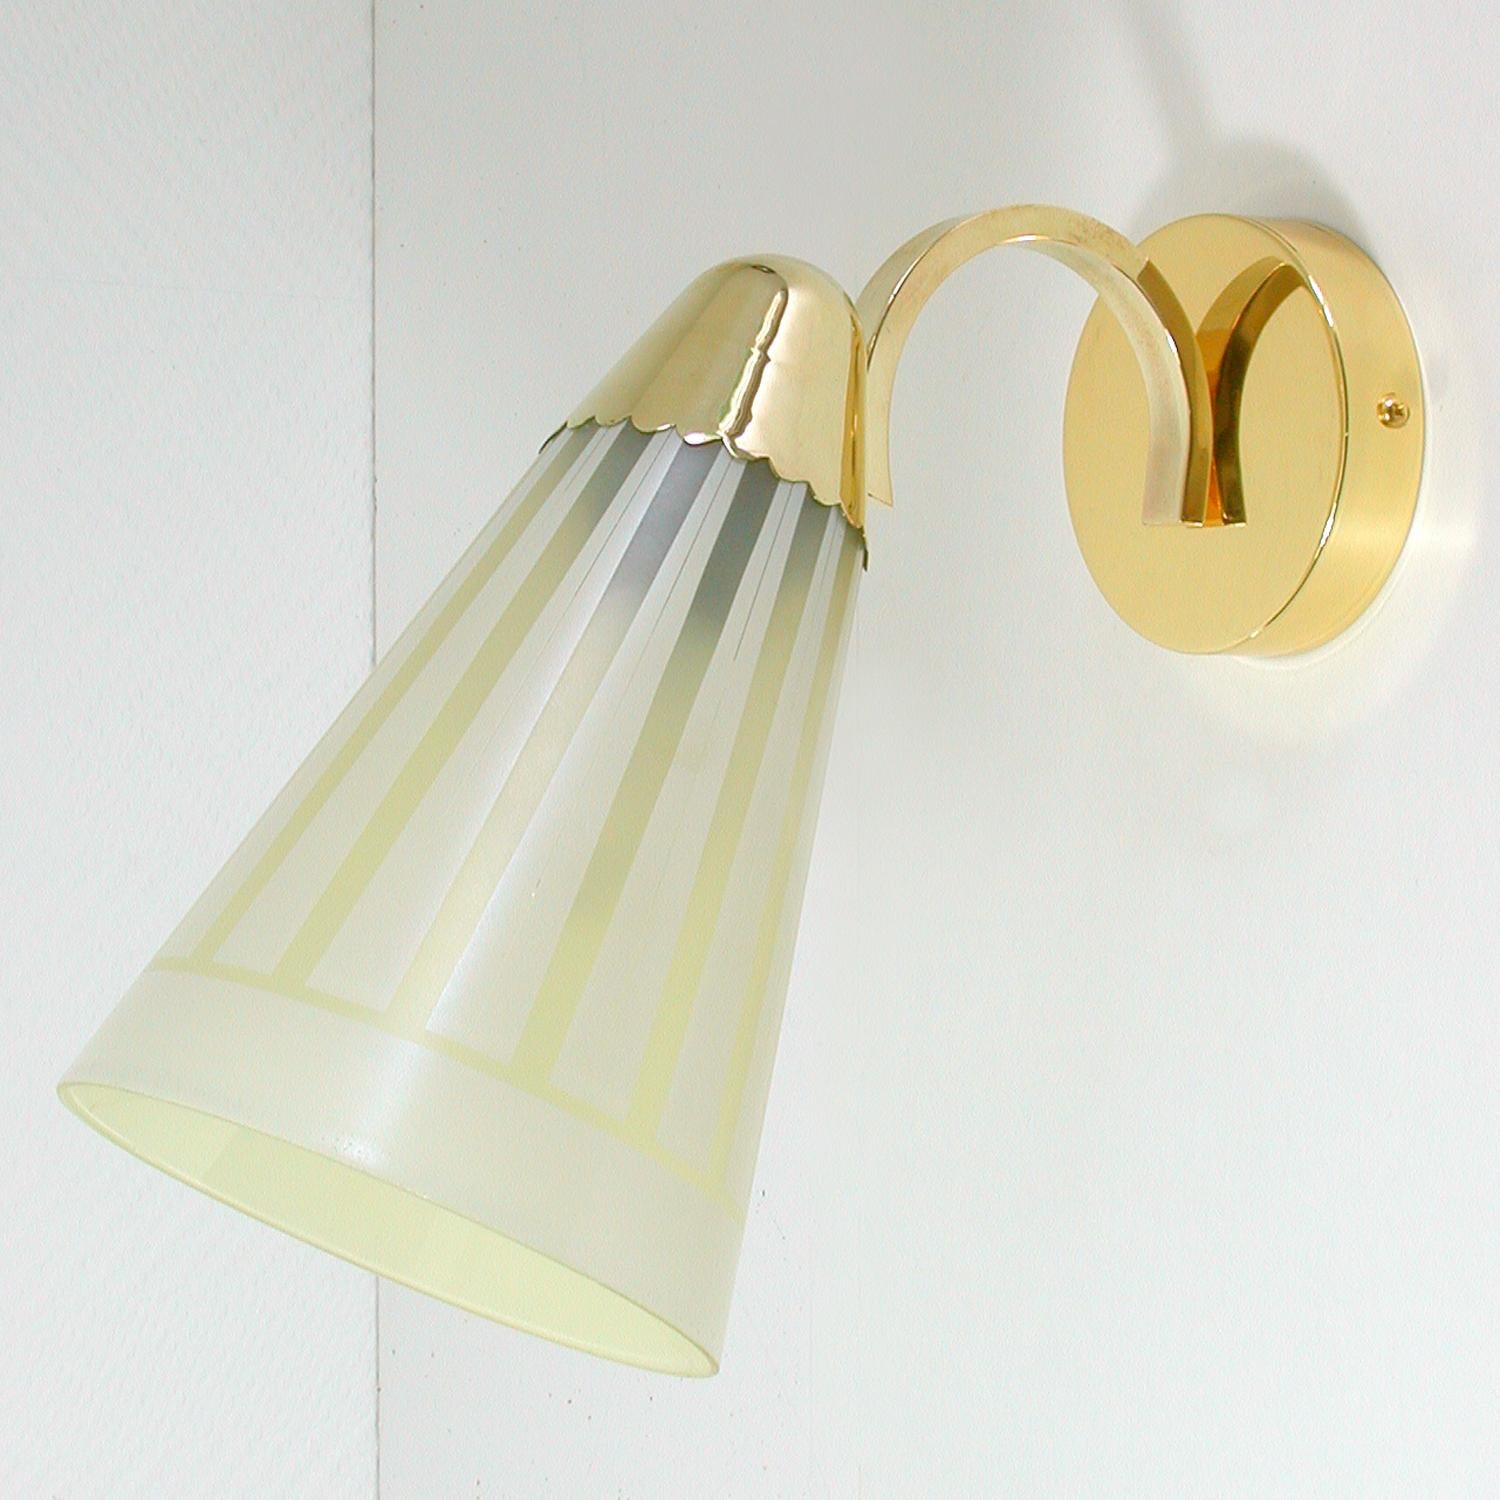 This elegant large midcentury wall light was designed and manufactured in Germany in the 1960s.

It is made of brass and has got a glass lamp shade. The lamp can be attached upright as well as shining downwards.

The lamp is in full working